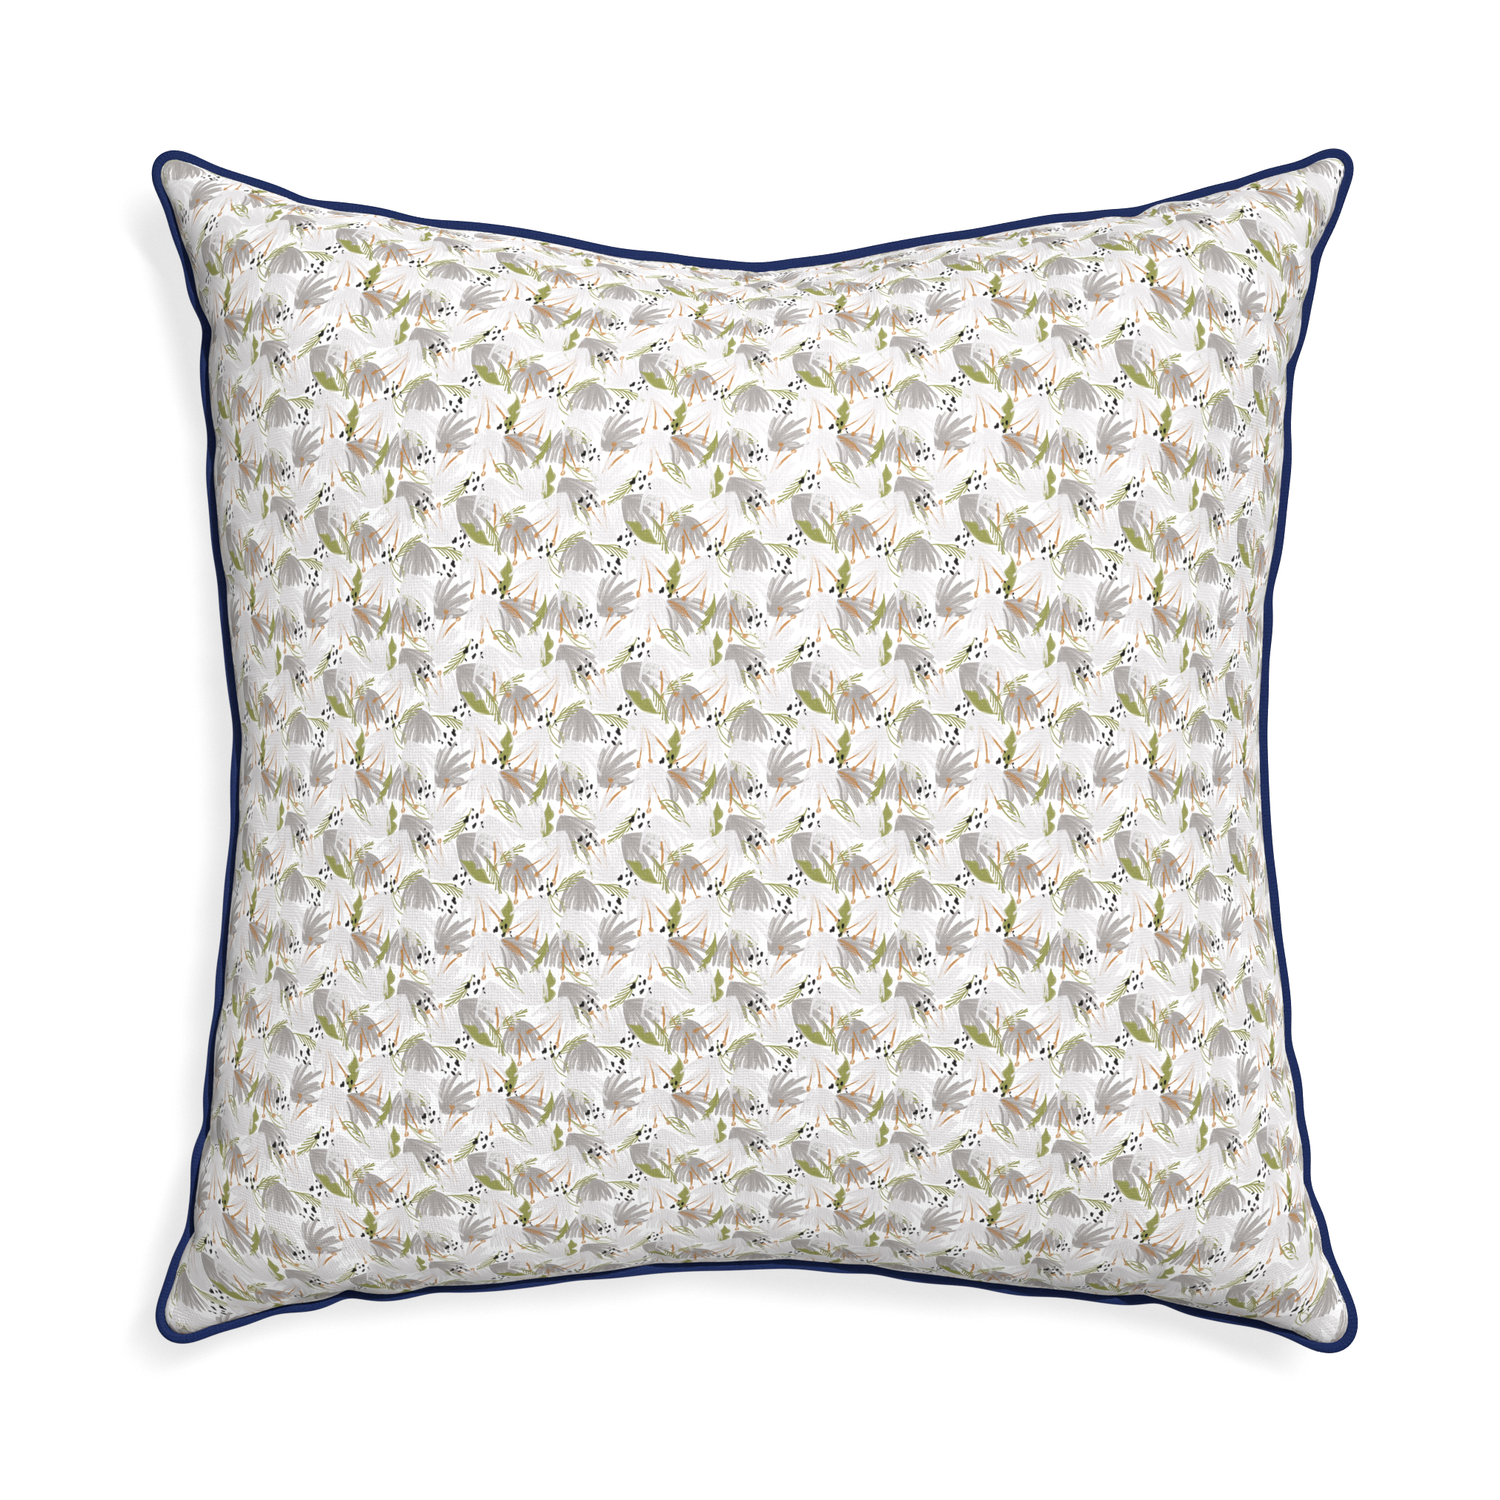 Euro-sham eden grey custom grey floralpillow with midnight piping on white background